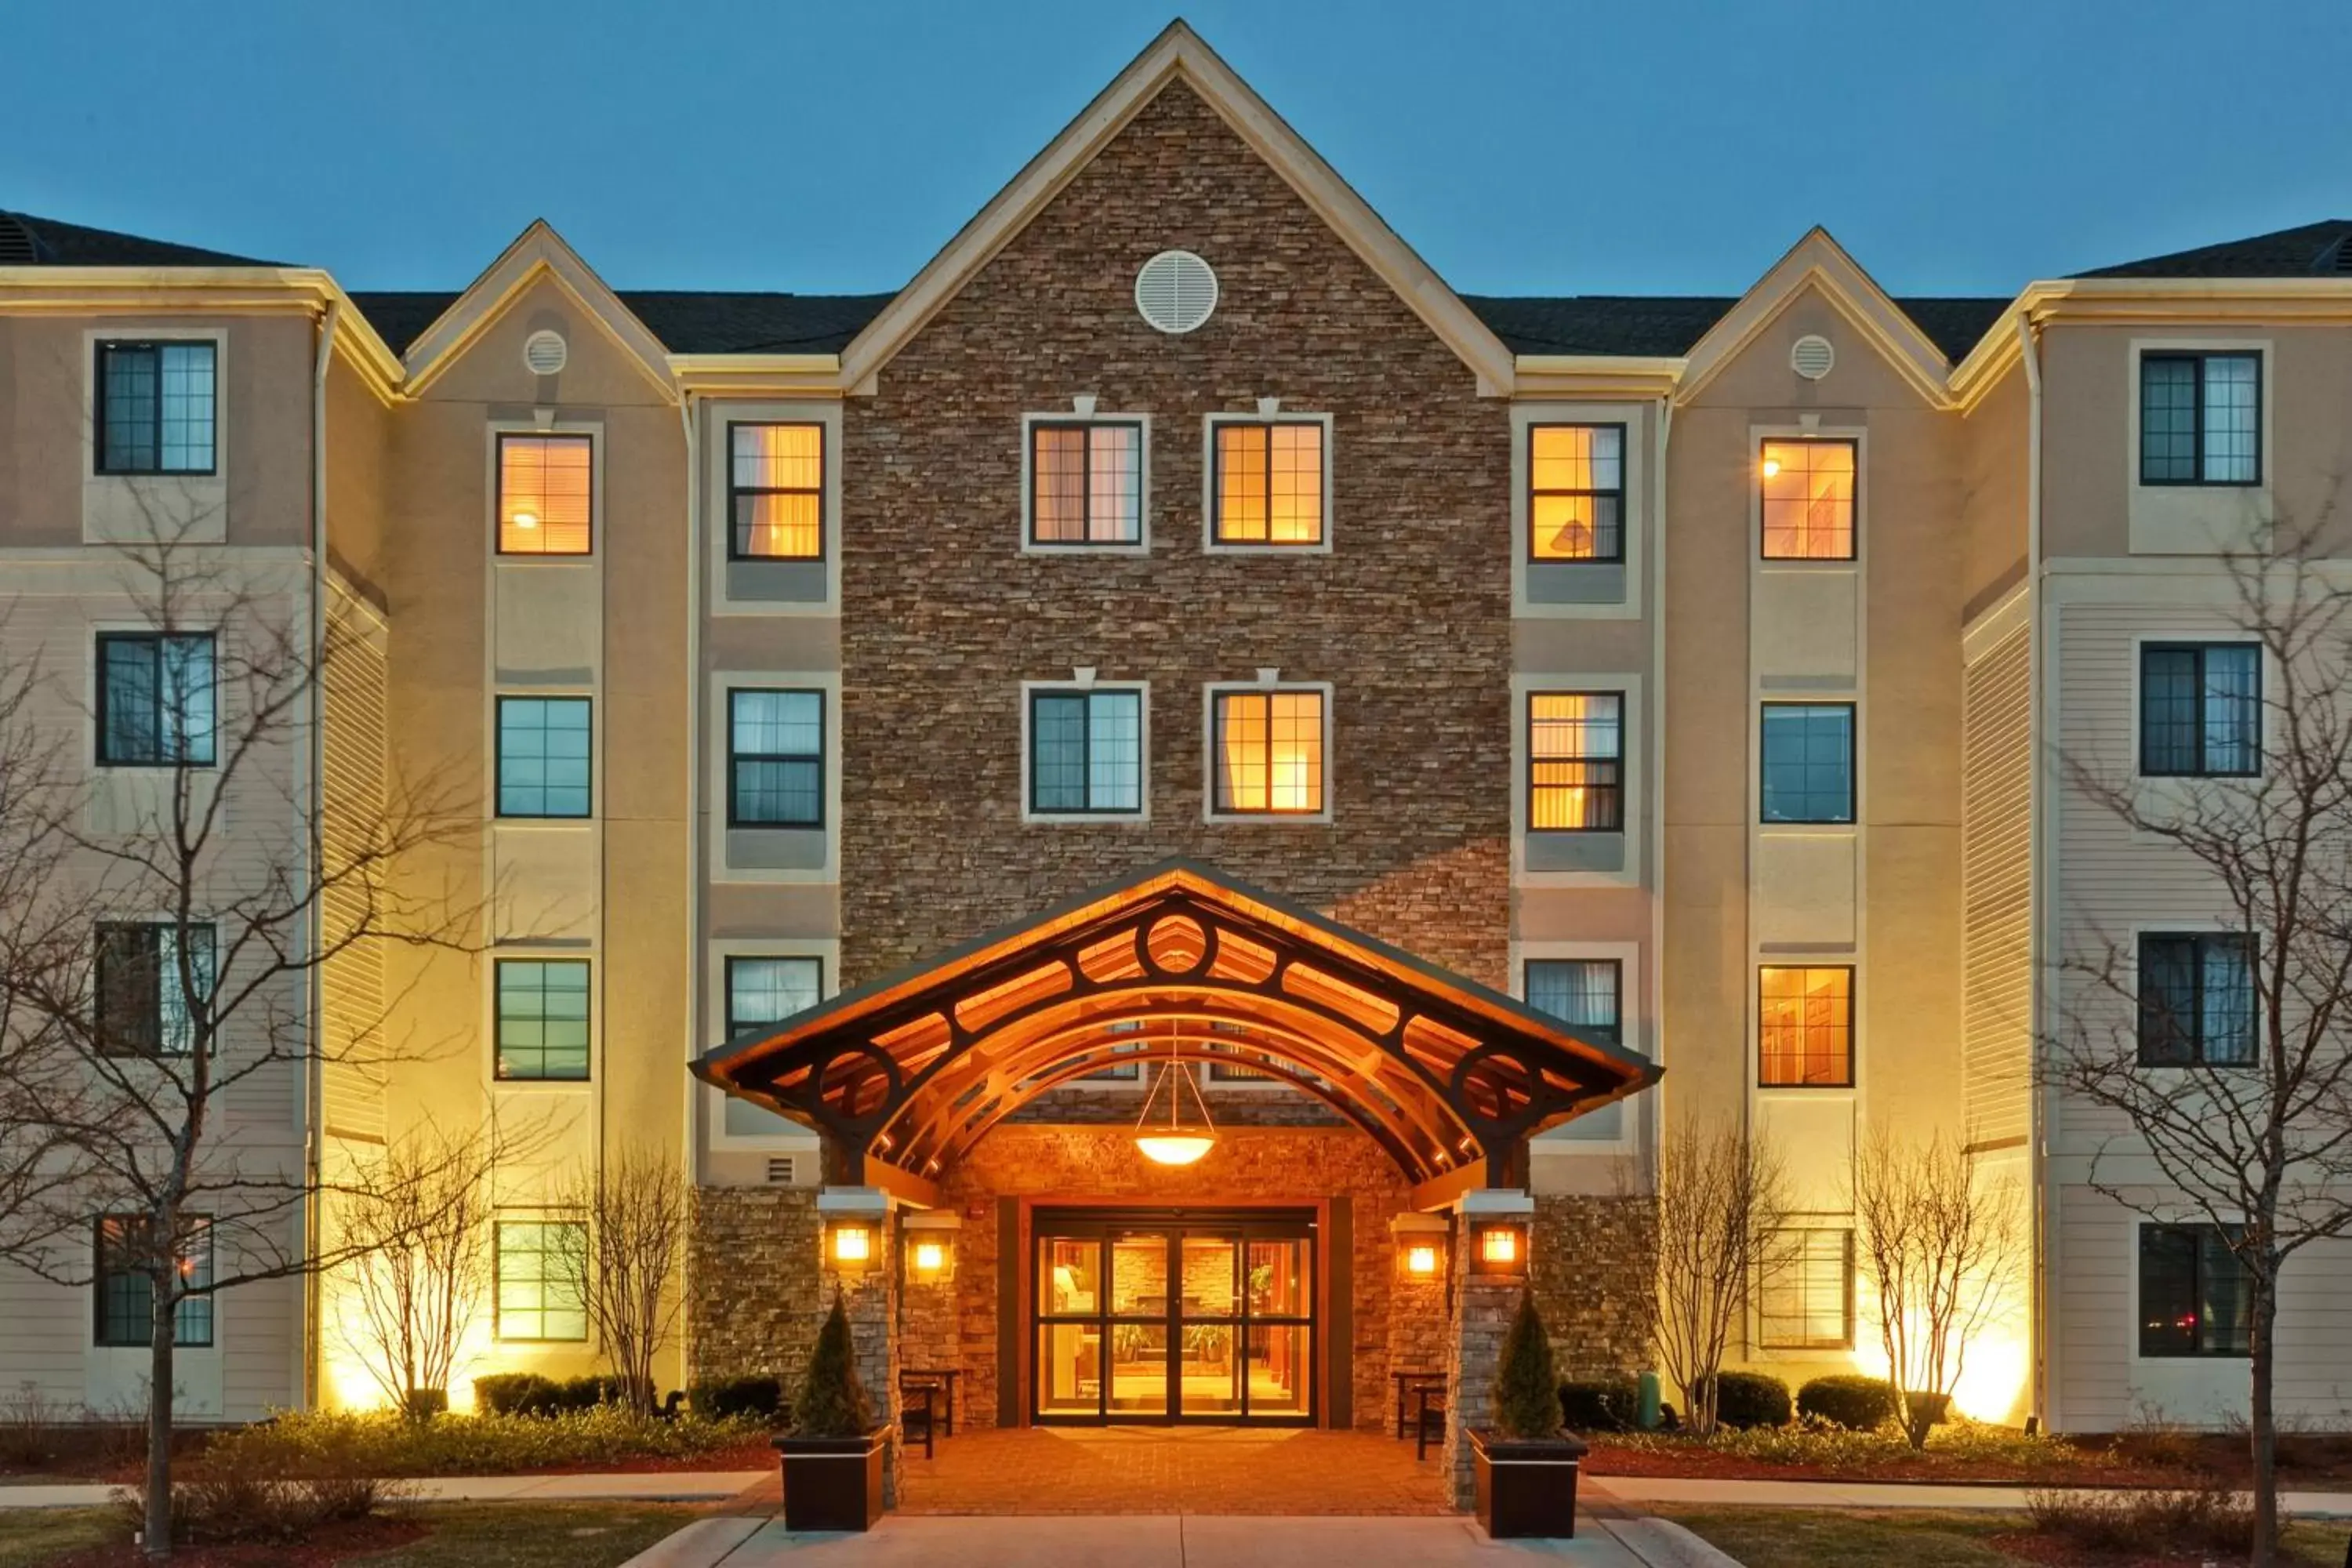 Property Building in Staybridge Suites Glenview, an IHG Hotel